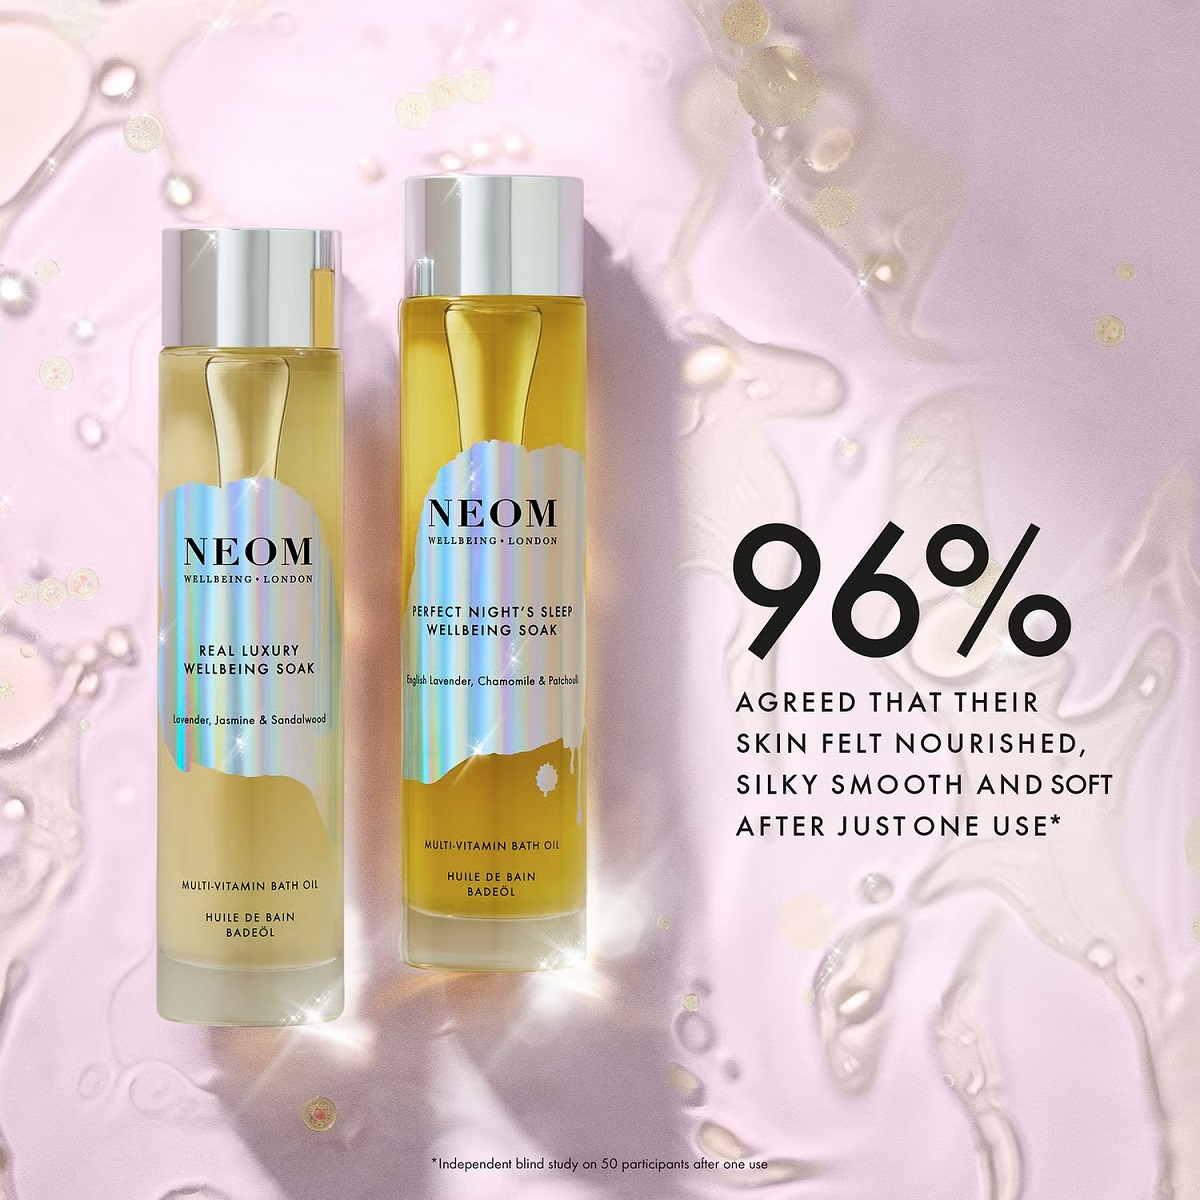 New launches from NEOM